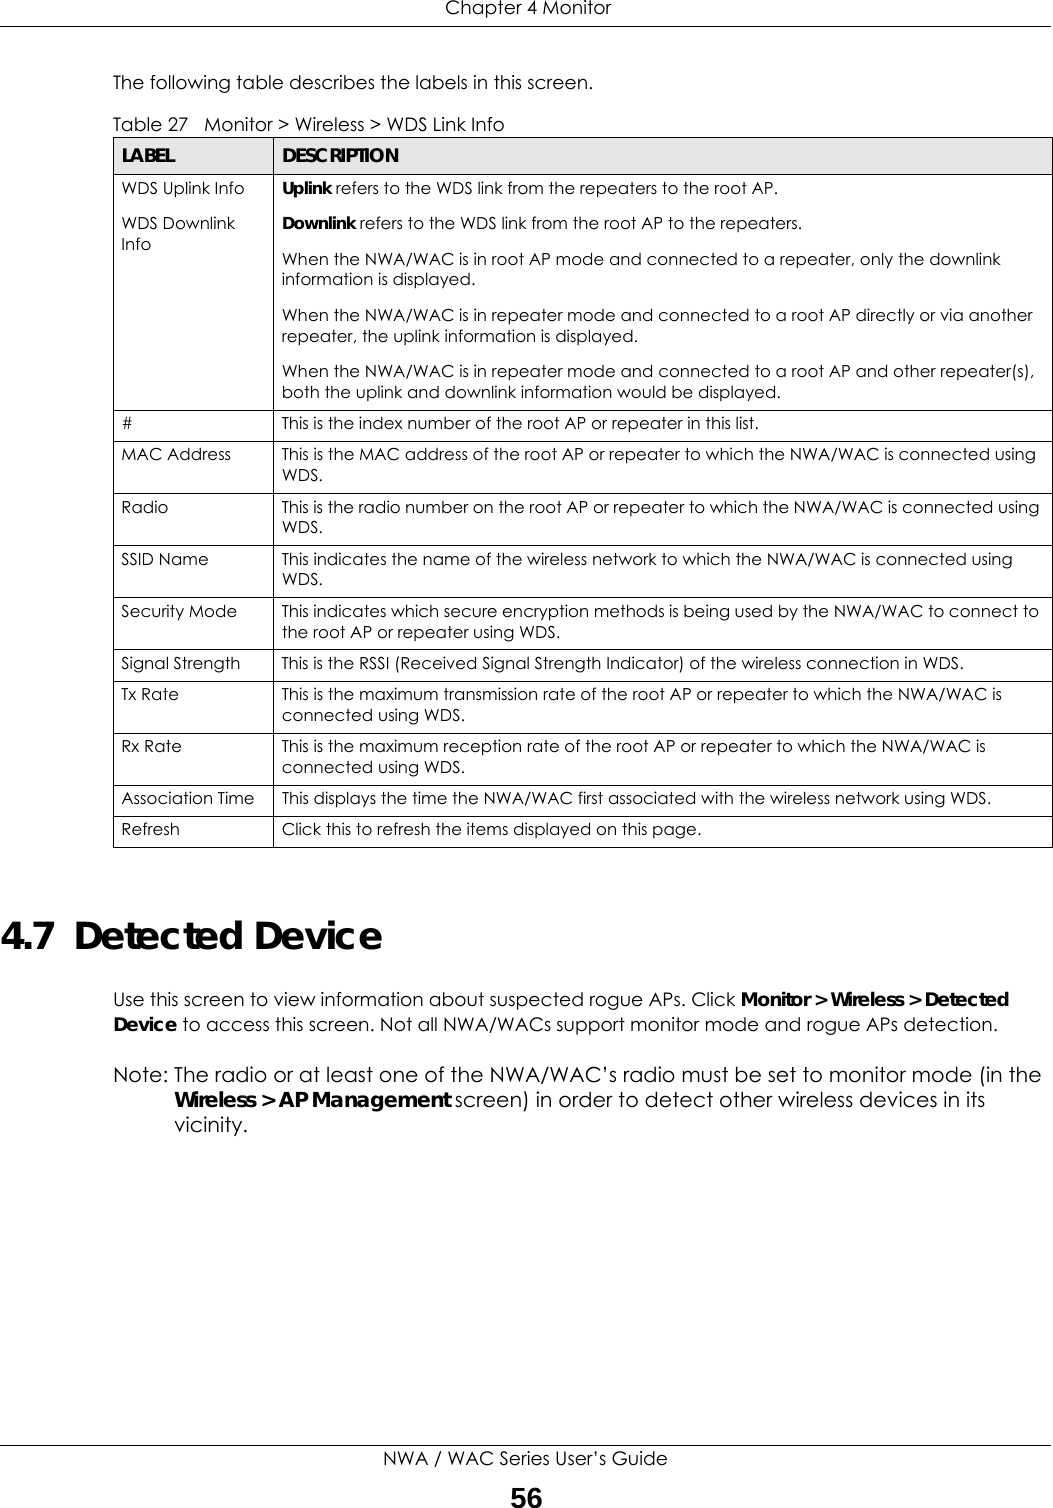  Chapter 4 MonitorNWA / WAC Series User’s Guide56The following table describes the labels in this screen.  4.7  Detected Device Use this screen to view information about suspected rogue APs. Click Monitor &gt; Wireless &gt; Detected Device to access this screen. Not all NWA/WACs support monitor mode and rogue APs detection.Note: The radio or at least one of the NWA/WAC’s radio must be set to monitor mode (in the Wireless &gt; AP Management screen) in order to detect other wireless devices in its vicinity.Table 27   Monitor &gt; Wireless &gt; WDS Link InfoLABEL DESCRIPTIONWDS Uplink InfoWDS Downlink InfoUplink refers to the WDS link from the repeaters to the root AP.Downlink refers to the WDS link from the root AP to the repeaters.When the NWA/WAC is in root AP mode and connected to a repeater, only the downlink information is displayed.When the NWA/WAC is in repeater mode and connected to a root AP directly or via another repeater, the uplink information is displayed.When the NWA/WAC is in repeater mode and connected to a root AP and other repeater(s), both the uplink and downlink information would be displayed.# This is the index number of the root AP or repeater in this list.MAC Address This is the MAC address of the root AP or repeater to which the NWA/WAC is connected using WDS.Radio This is the radio number on the root AP or repeater to which the NWA/WAC is connected using WDS.SSID Name This indicates the name of the wireless network to which the NWA/WAC is connected using WDS. Security Mode This indicates which secure encryption methods is being used by the NWA/WAC to connect to the root AP or repeater using WDS.Signal Strength This is the RSSI (Received Signal Strength Indicator) of the wireless connection in WDS.Tx Rate This is the maximum transmission rate of the root AP or repeater to which the NWA/WAC is connected using WDS.Rx Rate This is the maximum reception rate of the root AP or repeater to which the NWA/WAC is connected using WDS.Association Time This displays the time the NWA/WAC first associated with the wireless network using WDS.Refresh Click this to refresh the items displayed on this page.